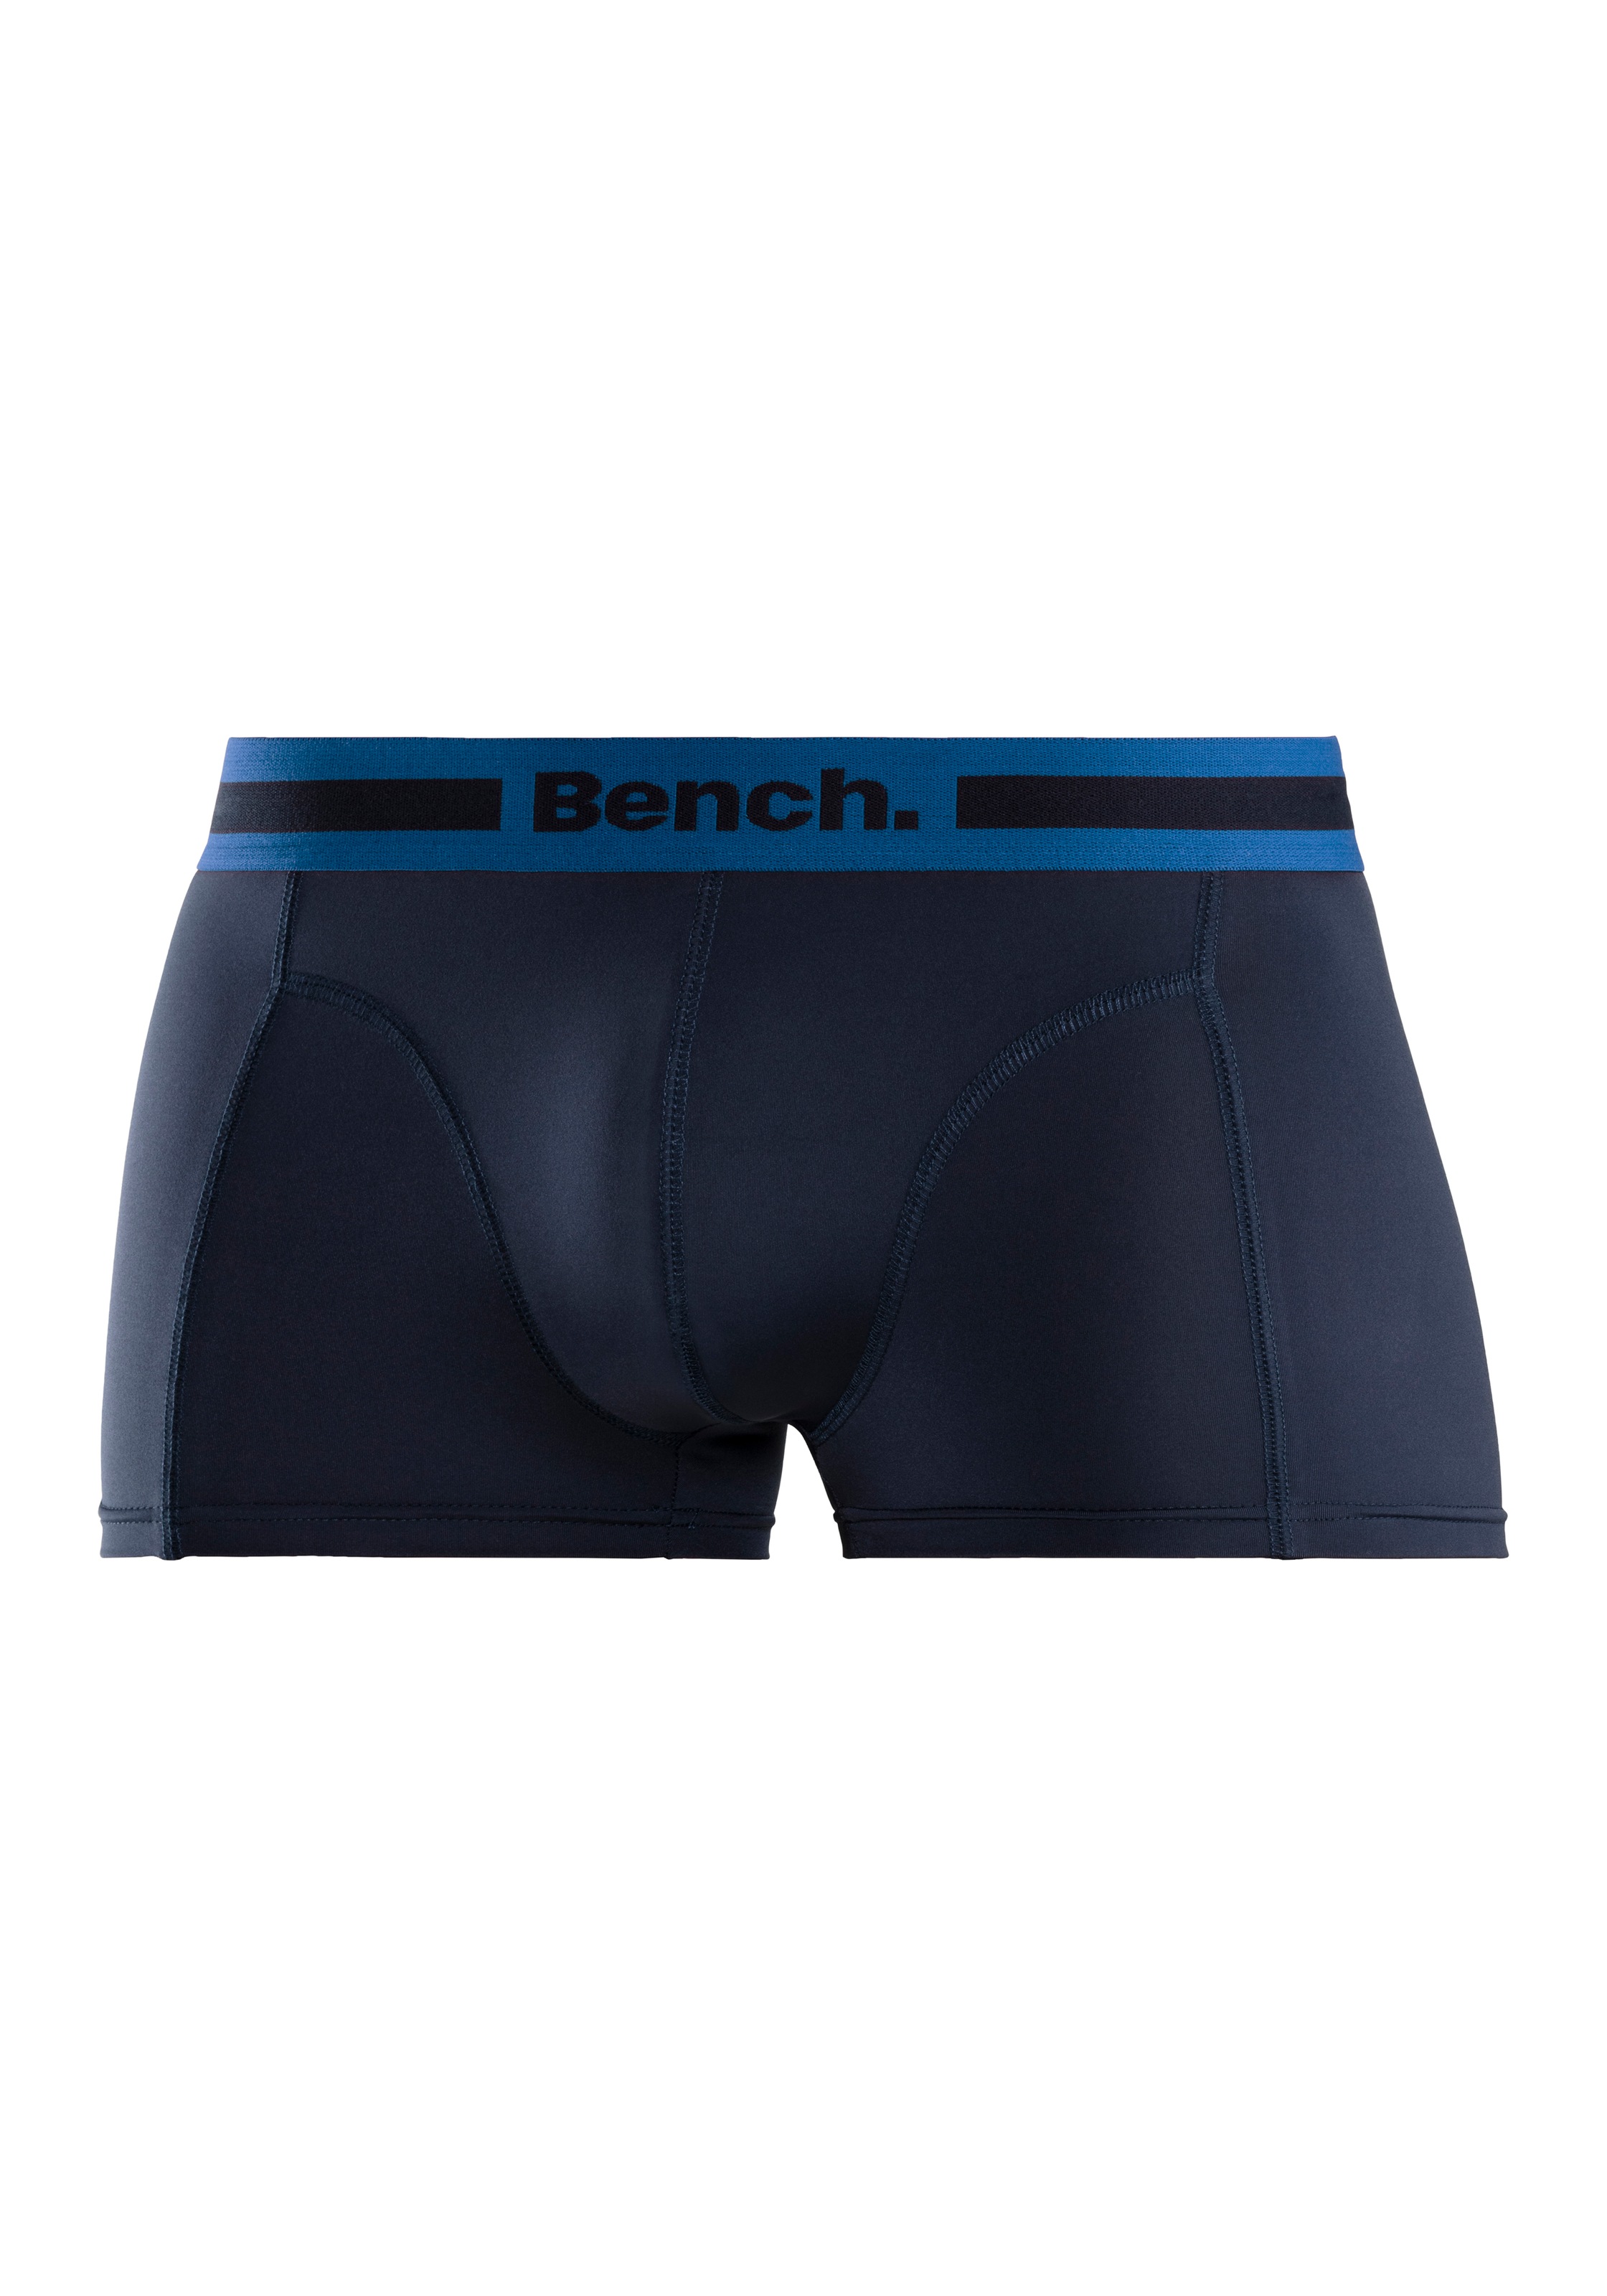 Bench. Funktionsboxer, (Packung, 4 St.), aus Microfaser